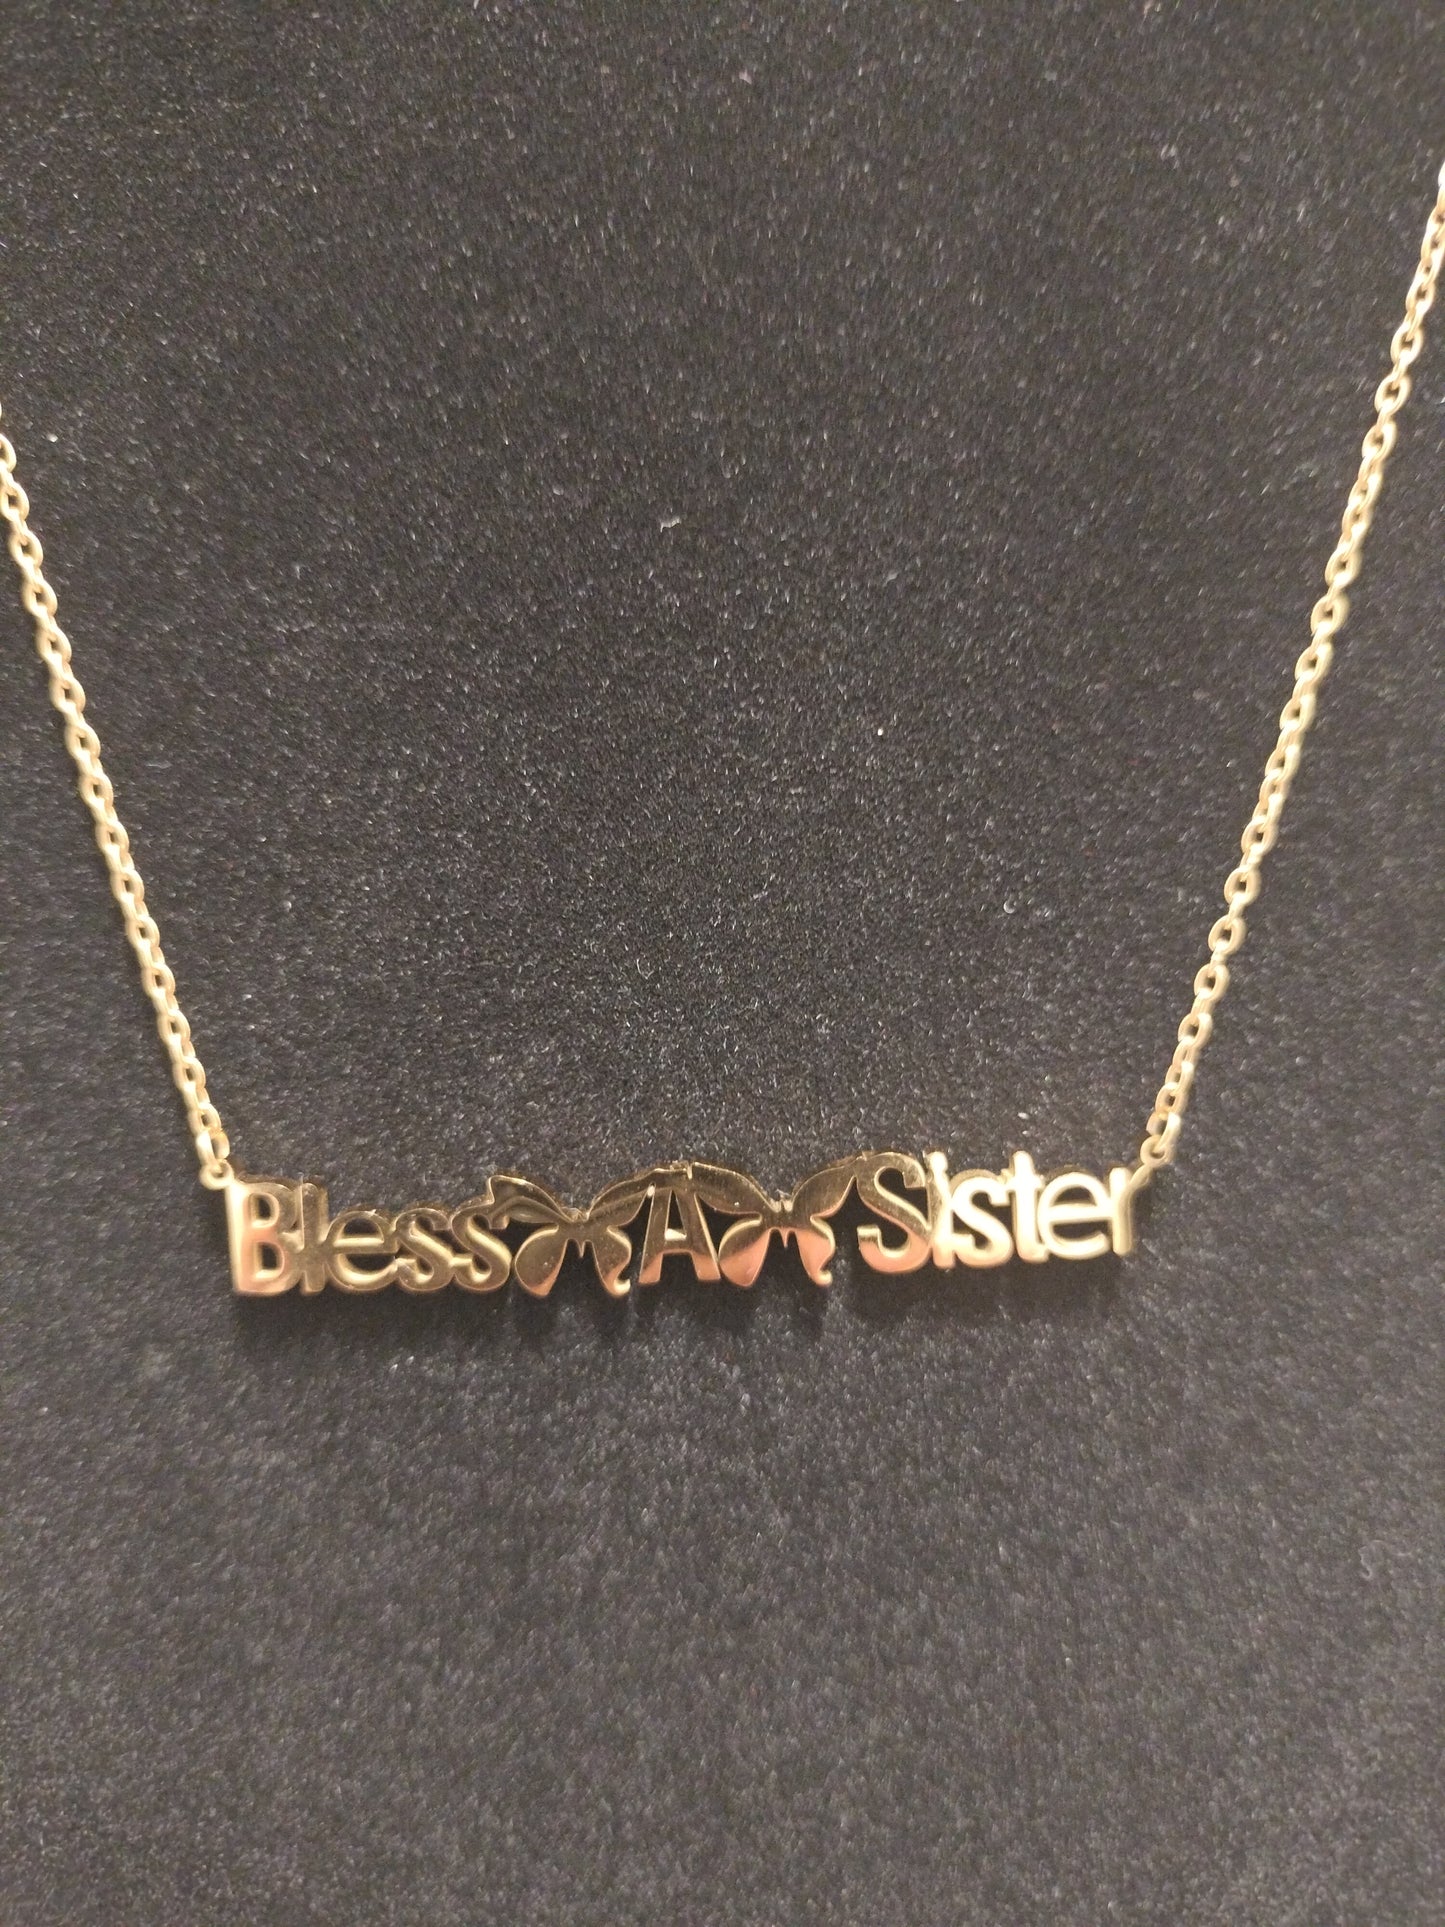 Bless A Sister Name Necklace